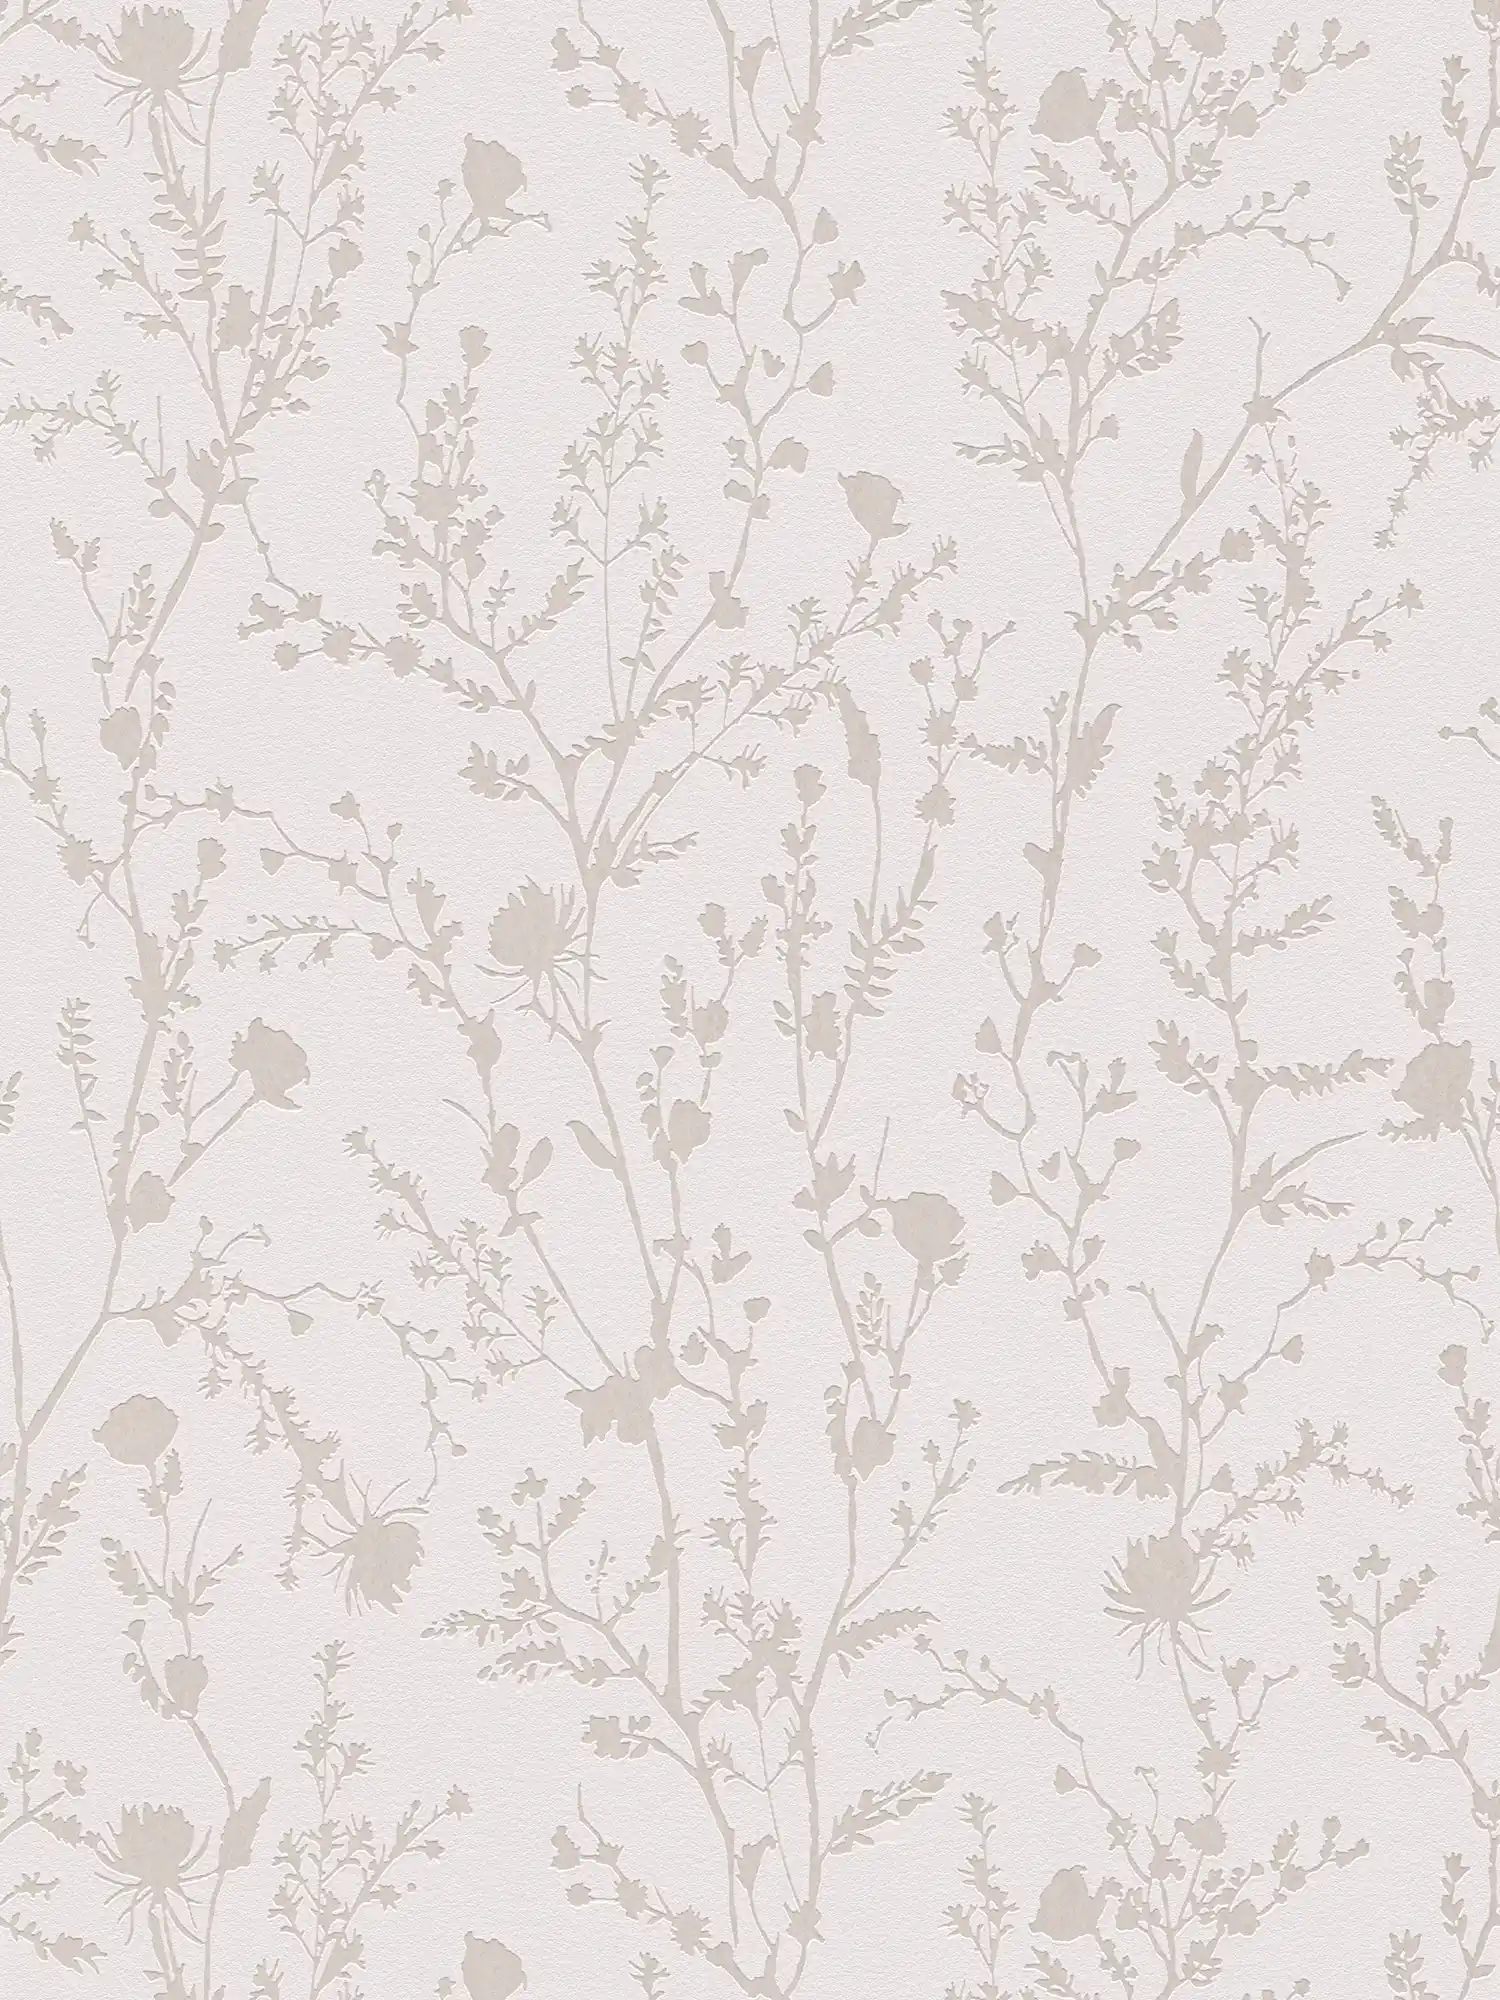 Floral non-woven wallpaper with a playful floral pattern - light pink, light grey
